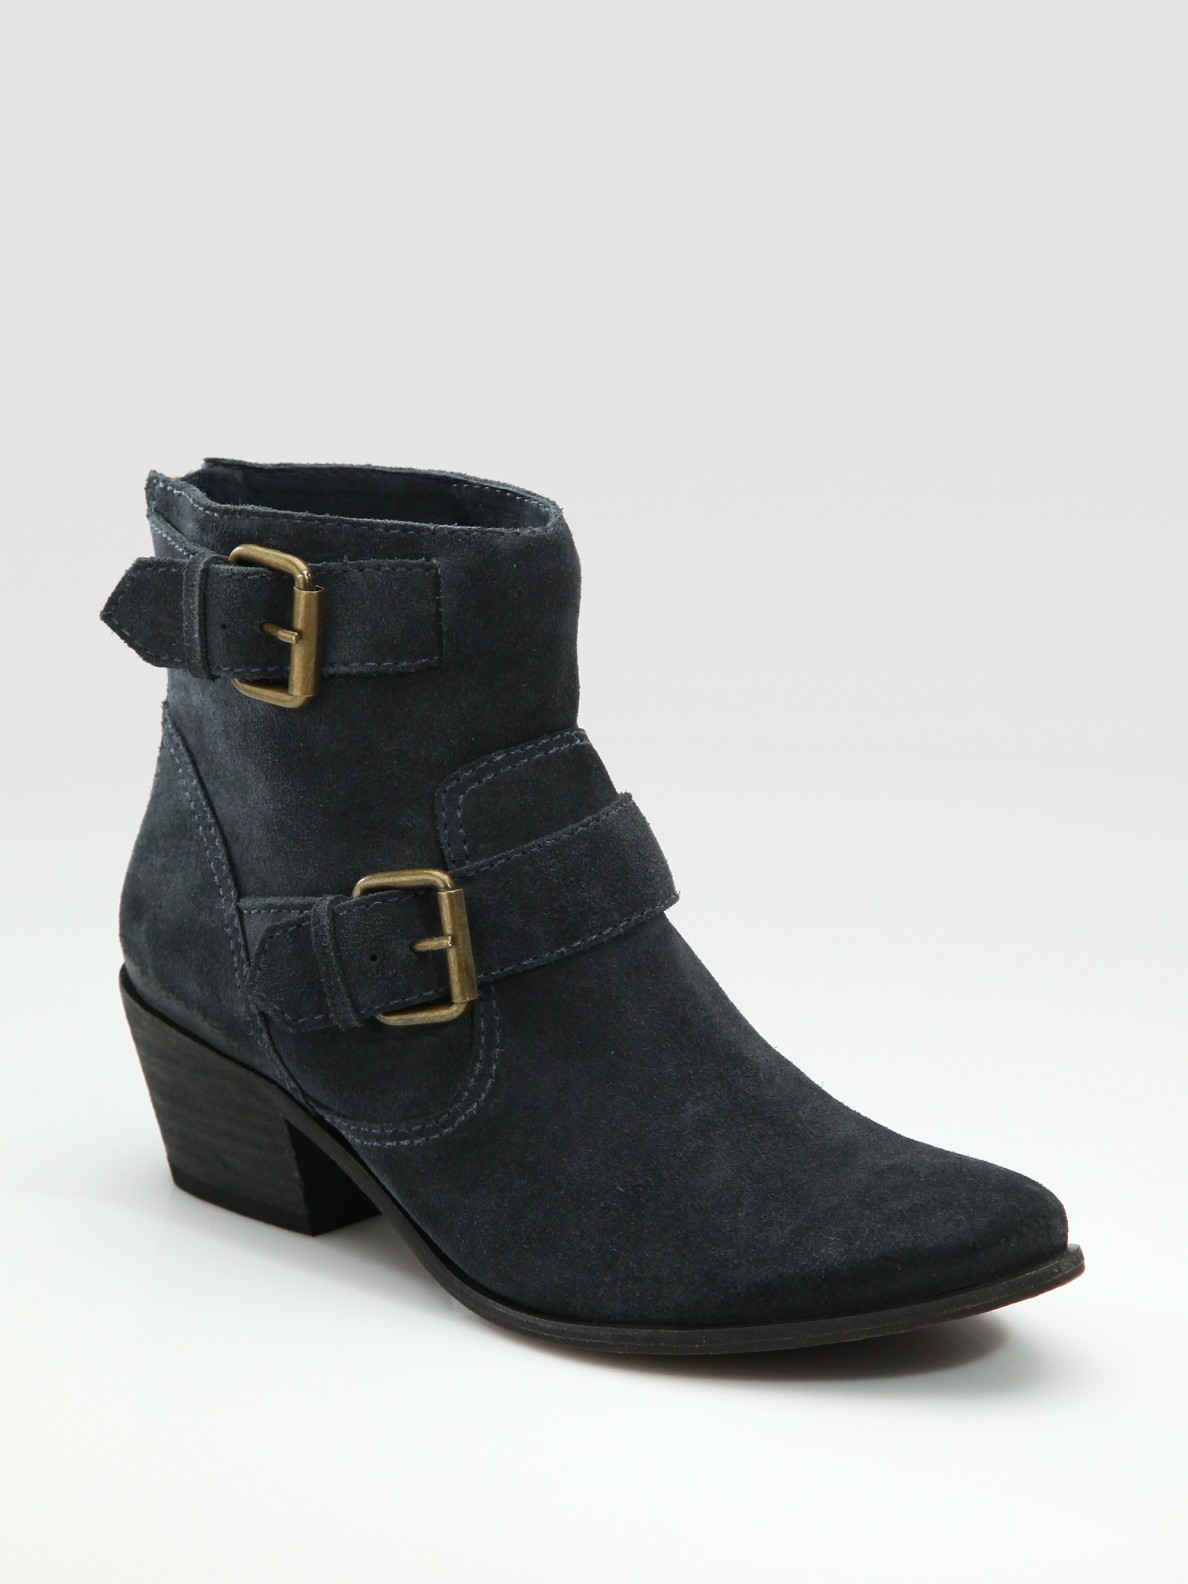 Lyst - Joie Thunder Road Ankle Boots in Black